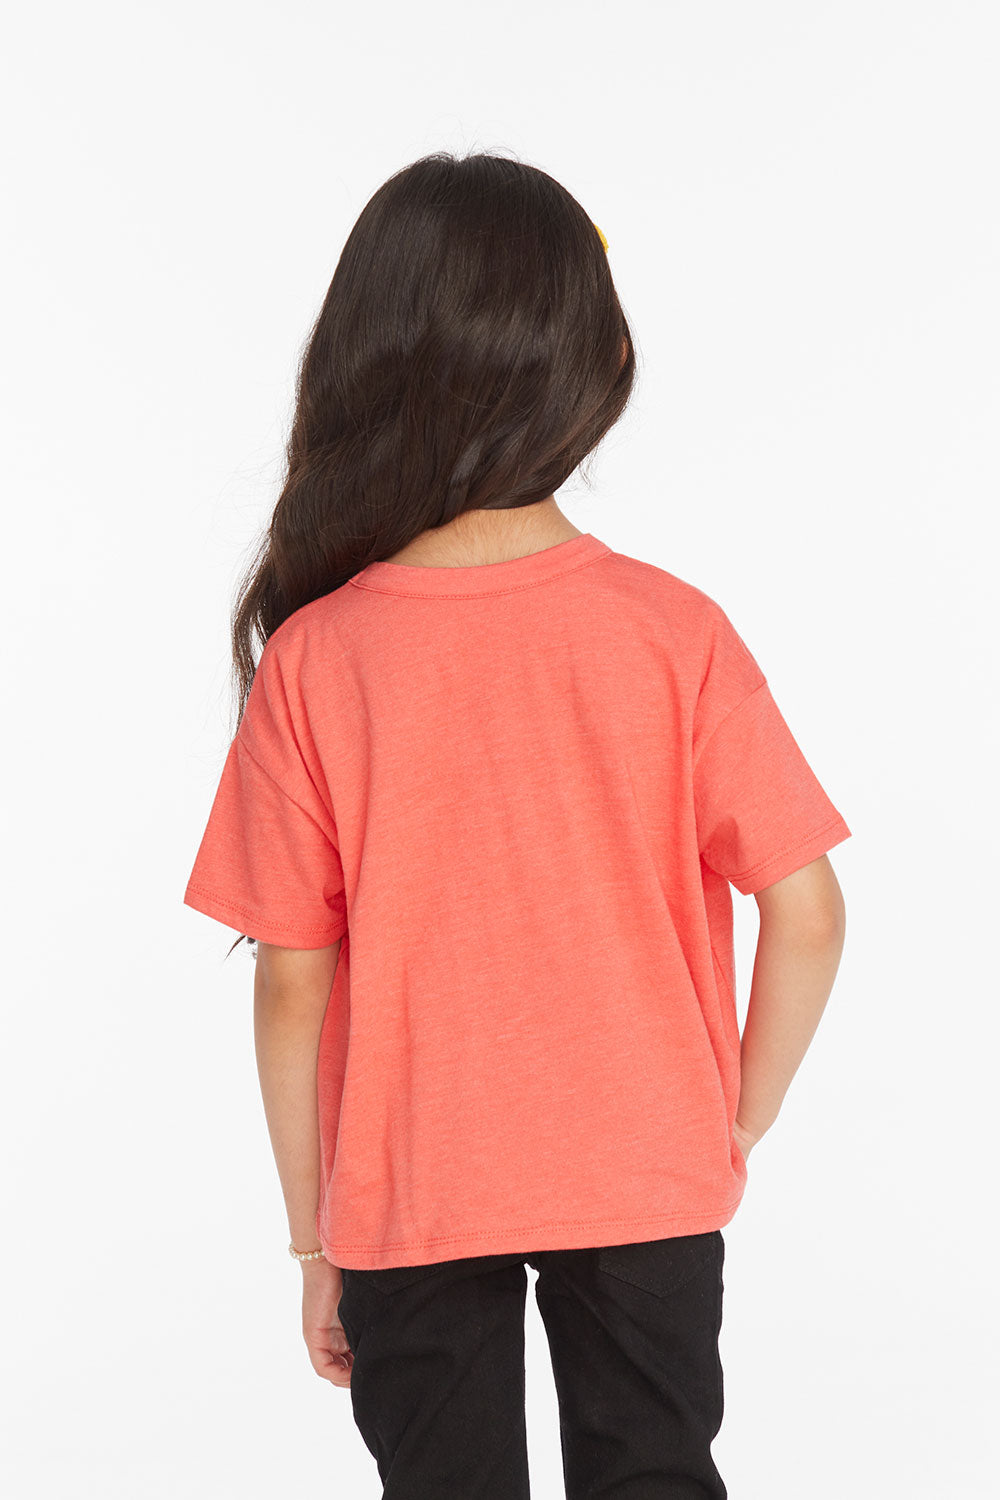 Lets Roll Girls Tee Girls chaserbrand